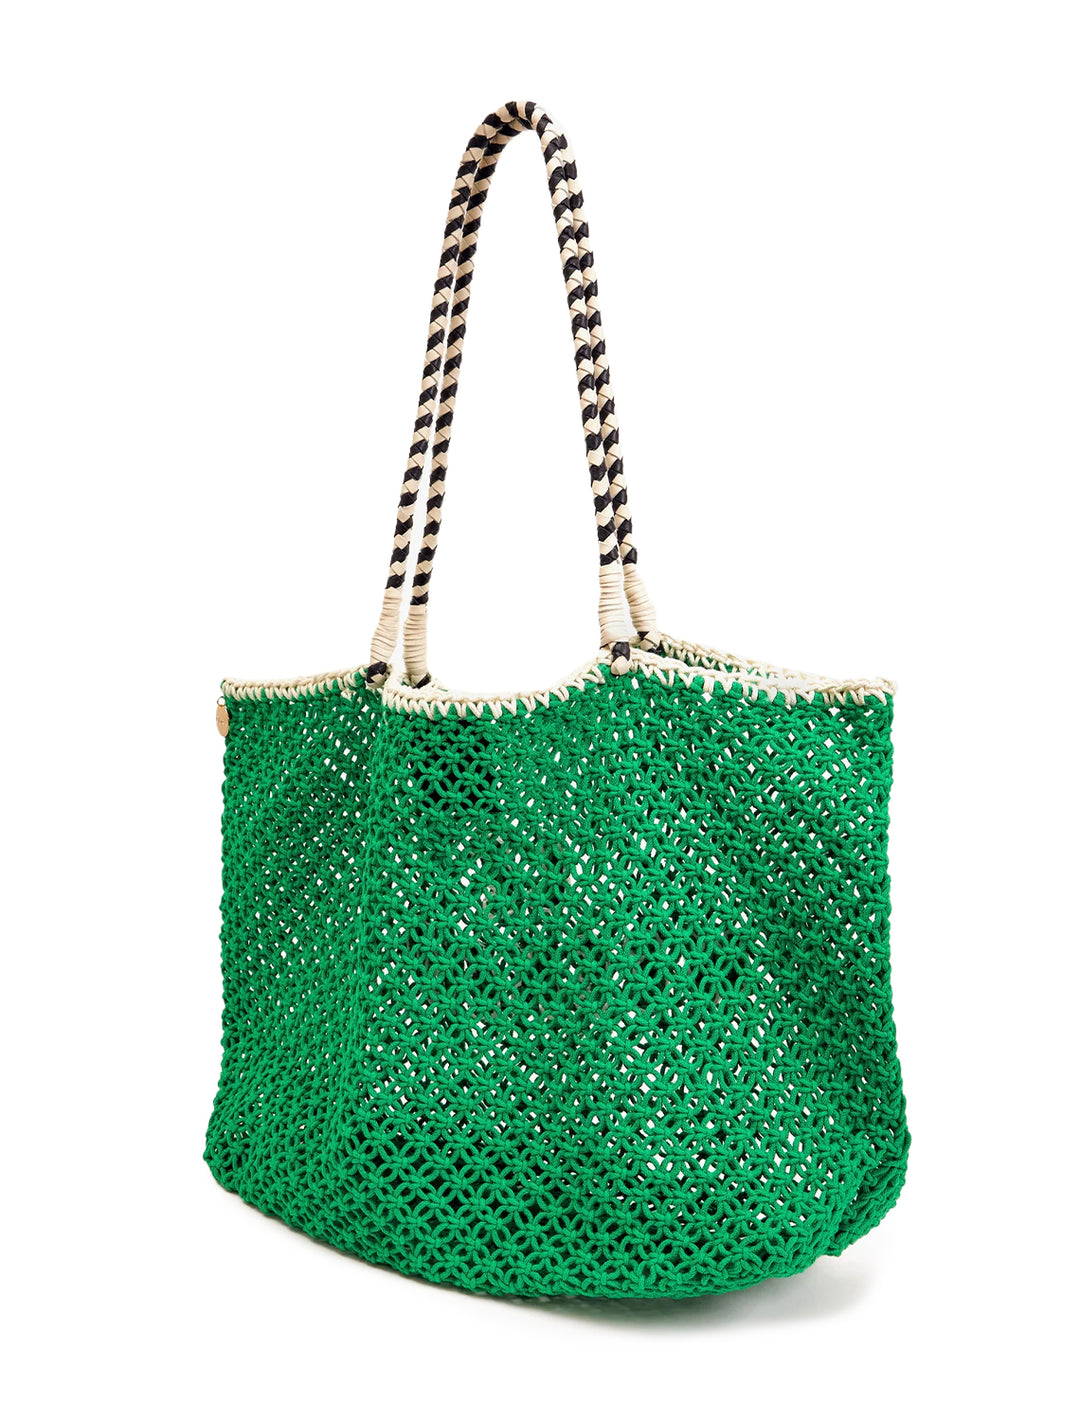 Back angle view of Clare V.'s lete tote | green crochet le weekend.